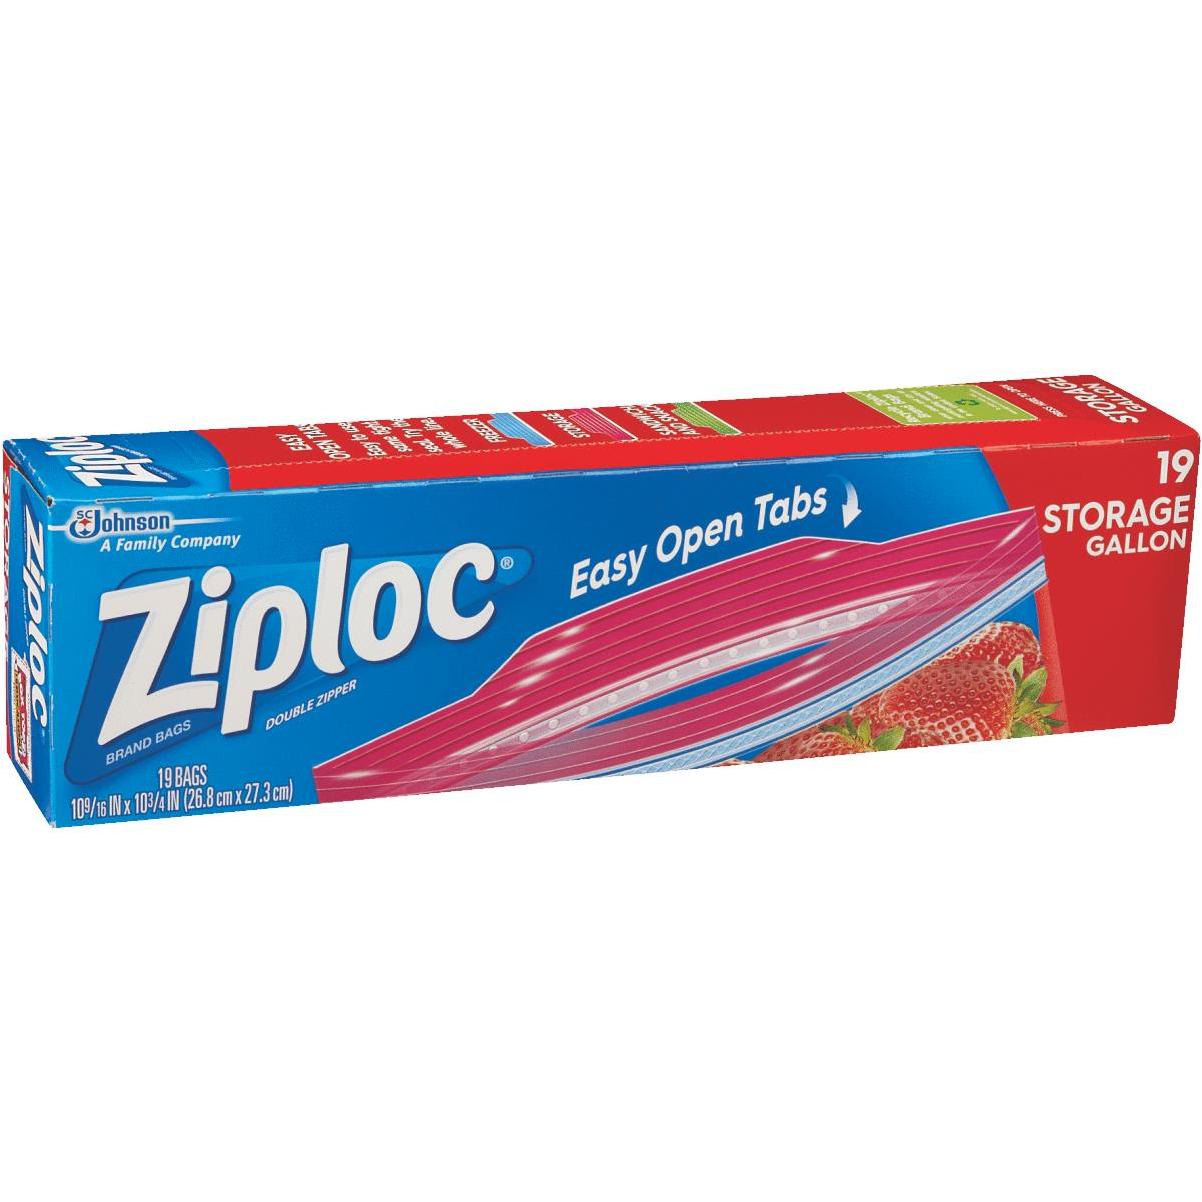 Ziploc Brand Storage Gallon Bags, Large Storage Bags for Food, 19 ct